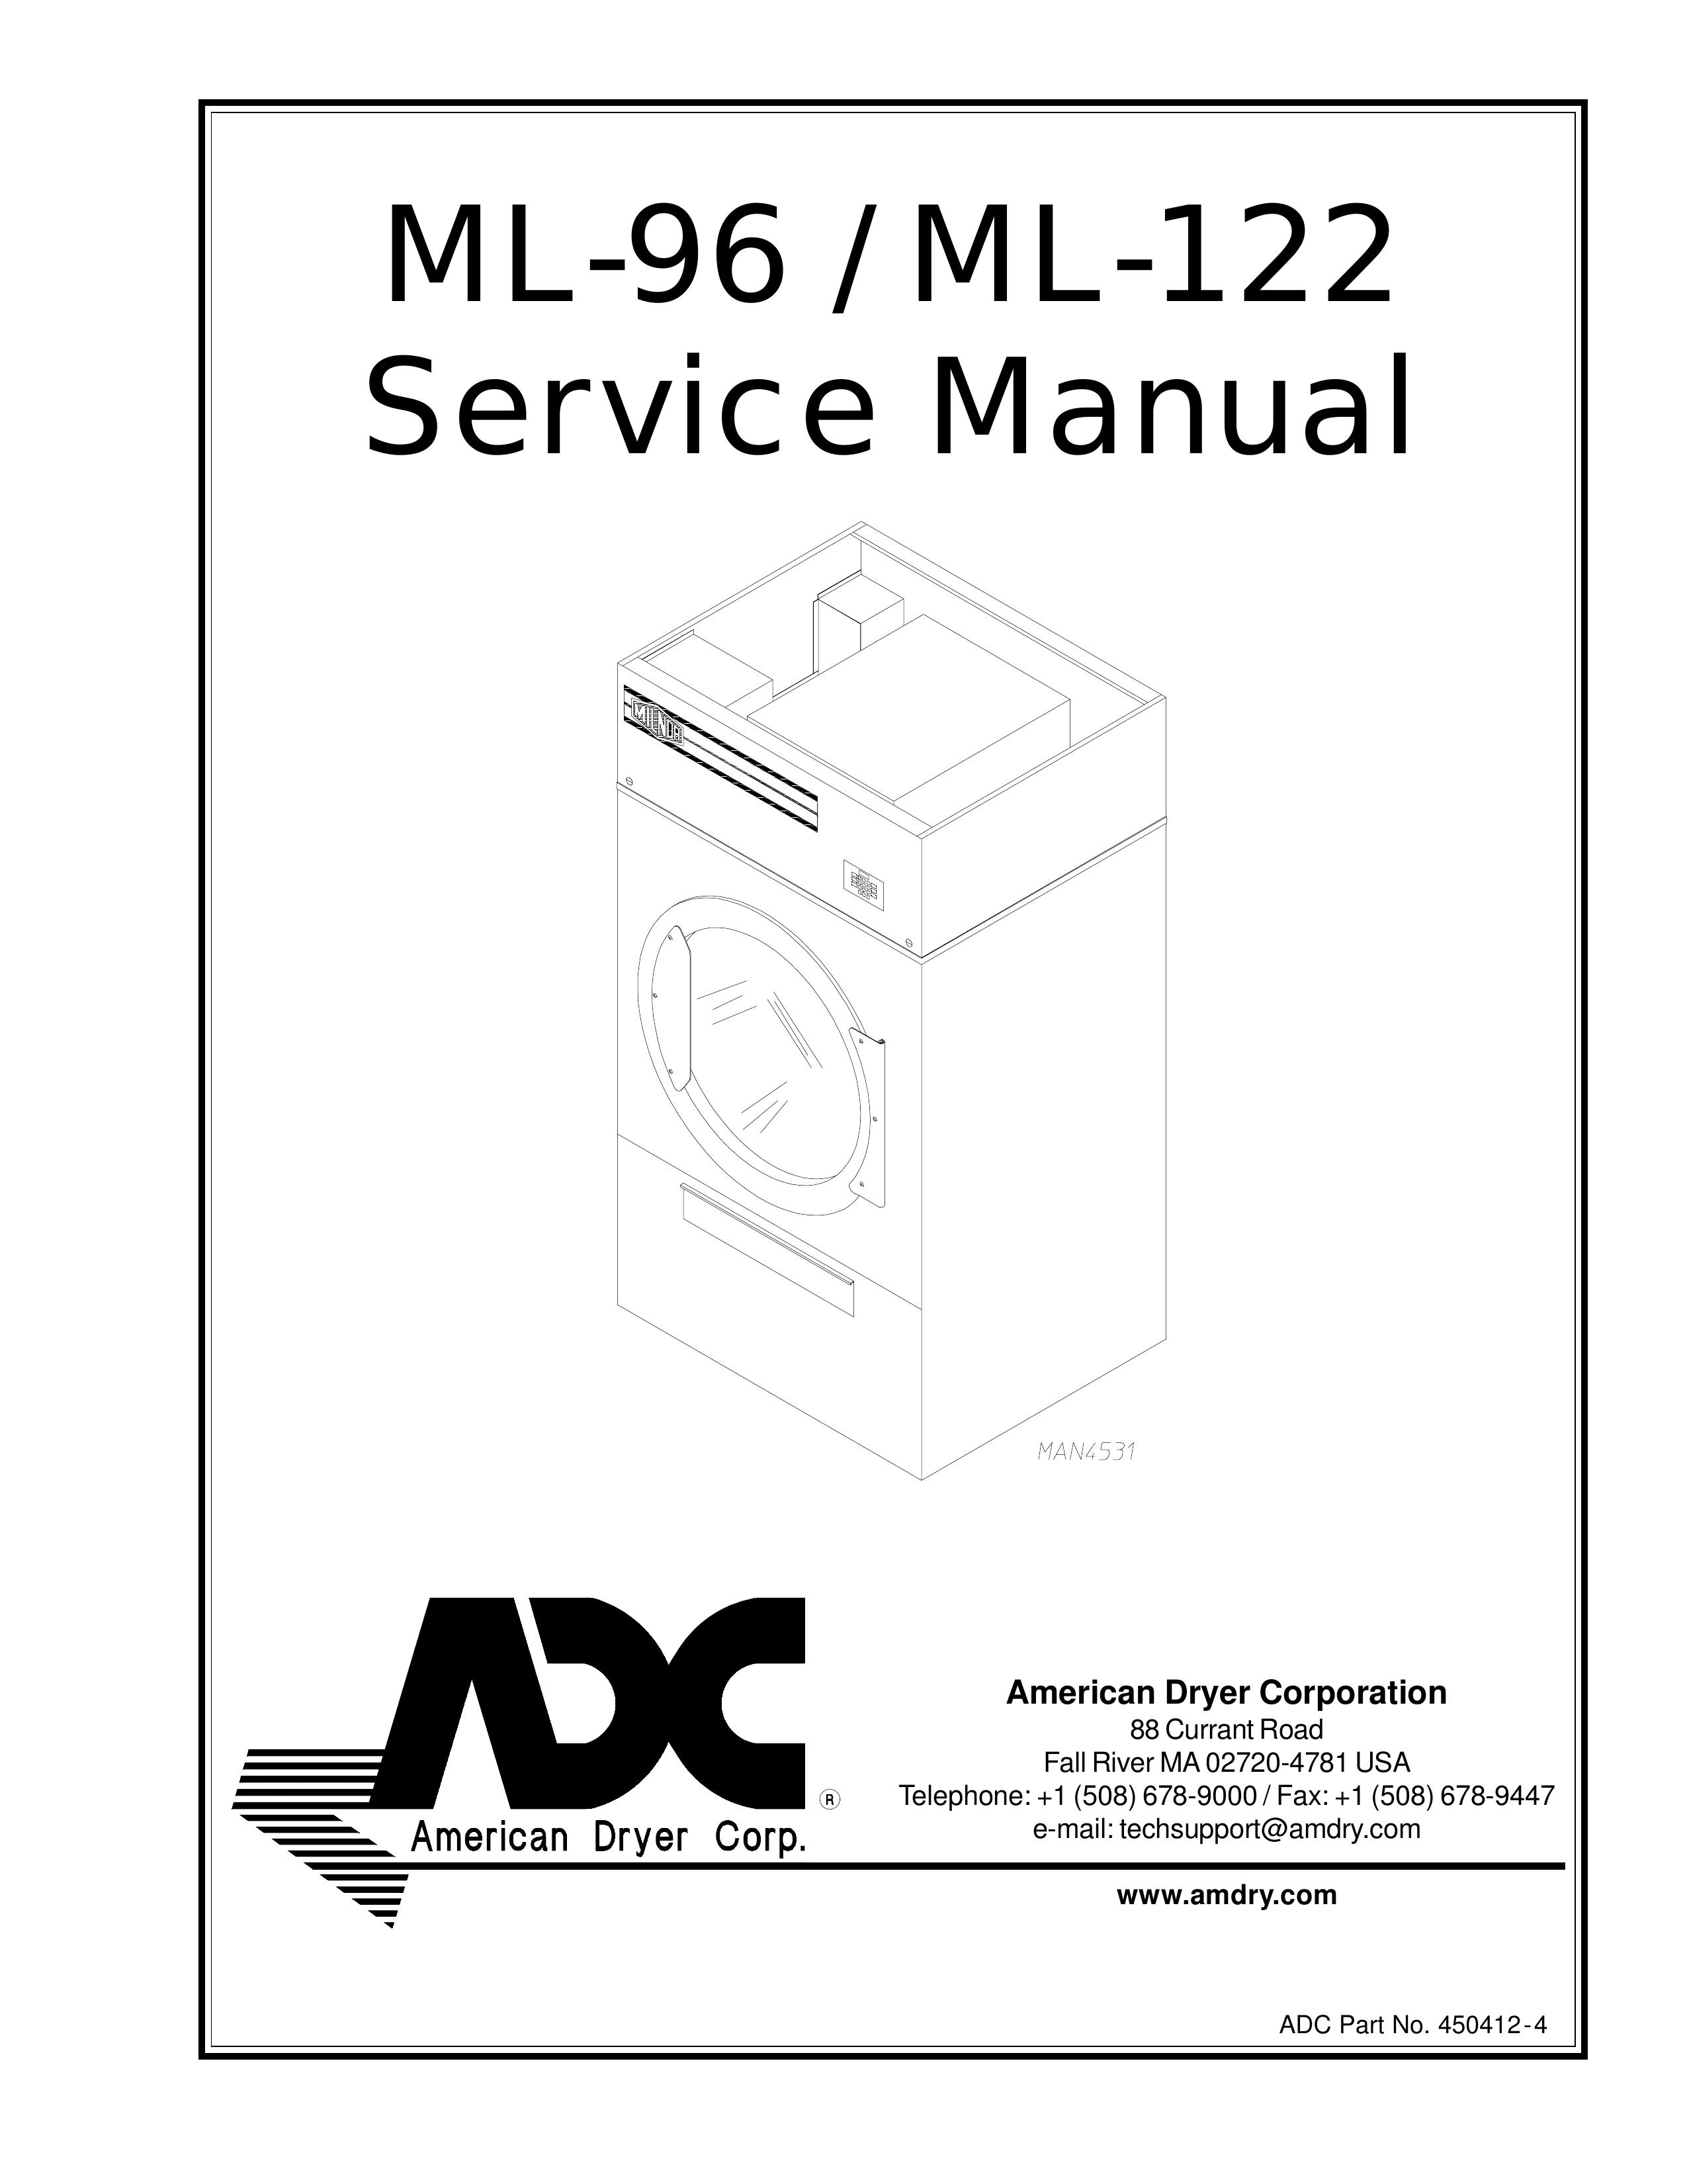 ADC ML-122 Clothes Dryer User Manual (Page 1)